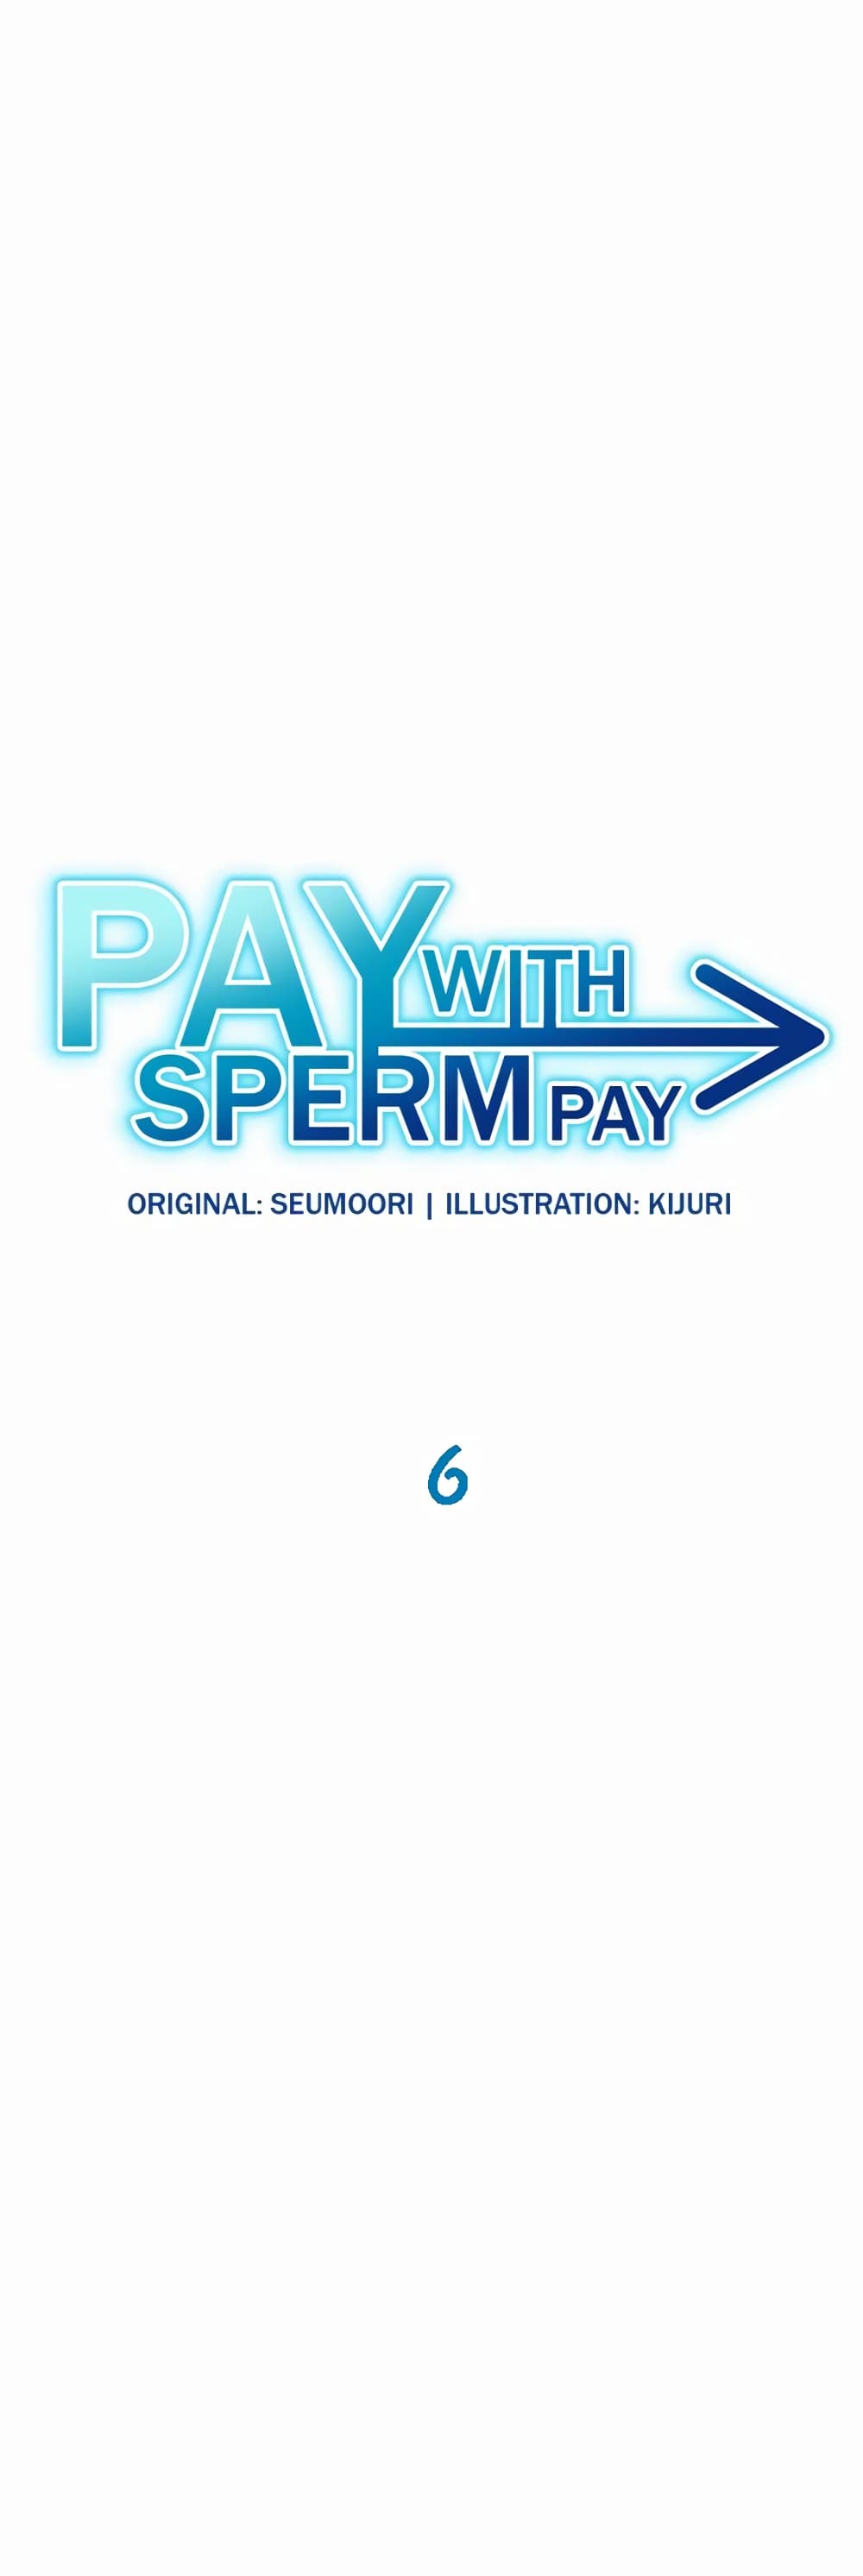 Pay with Sperm Pay 6 (1)